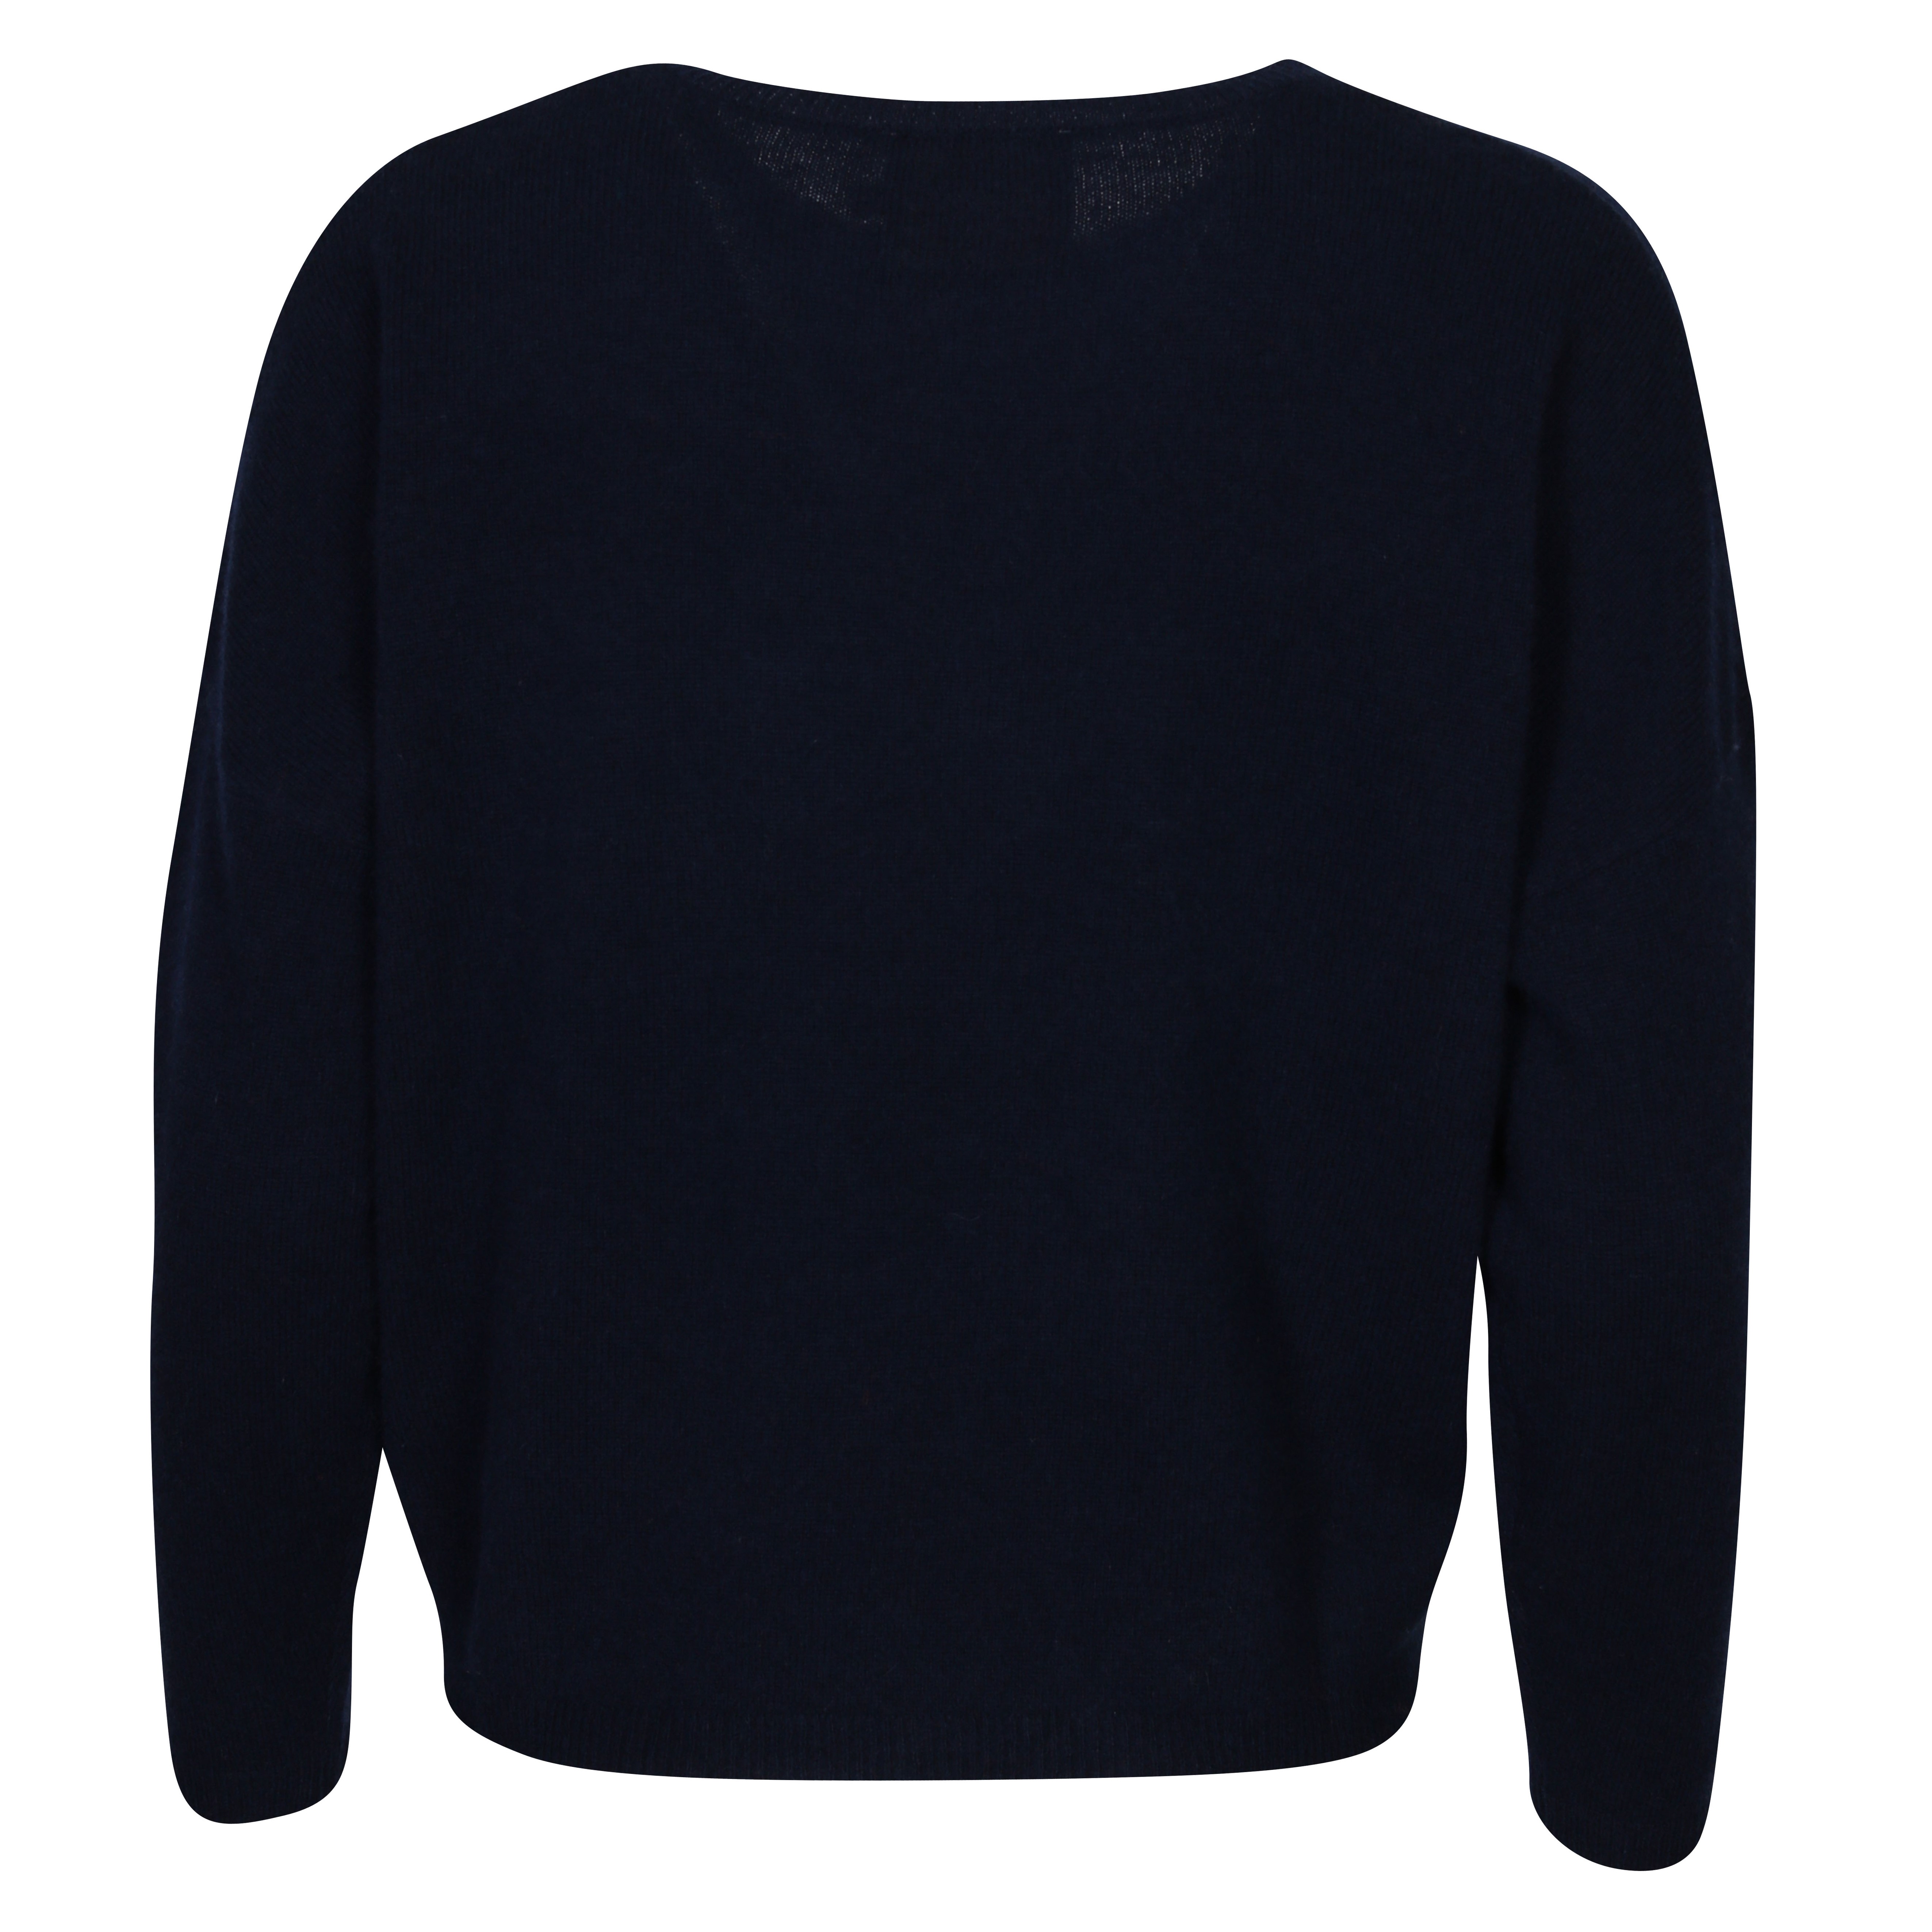 Absolut Cashmere Kaira Cashmere Pullover in Nuit S